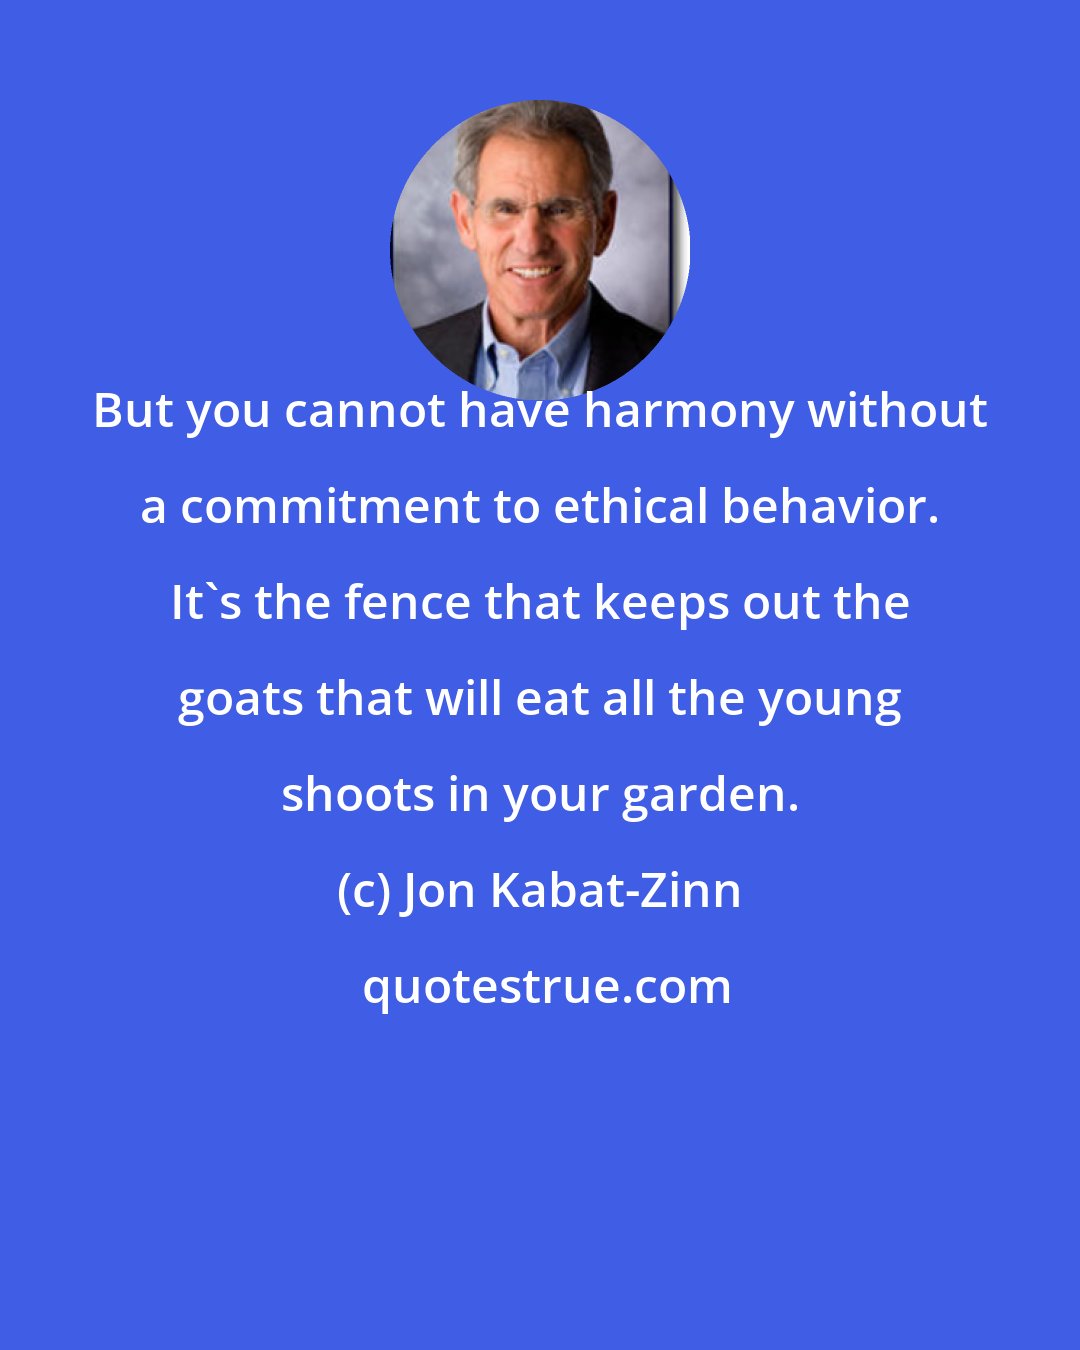 Jon Kabat-Zinn: But you cannot have harmony without a commitment to ethical behavior. It's the fence that keeps out the goats that will eat all the young shoots in your garden.